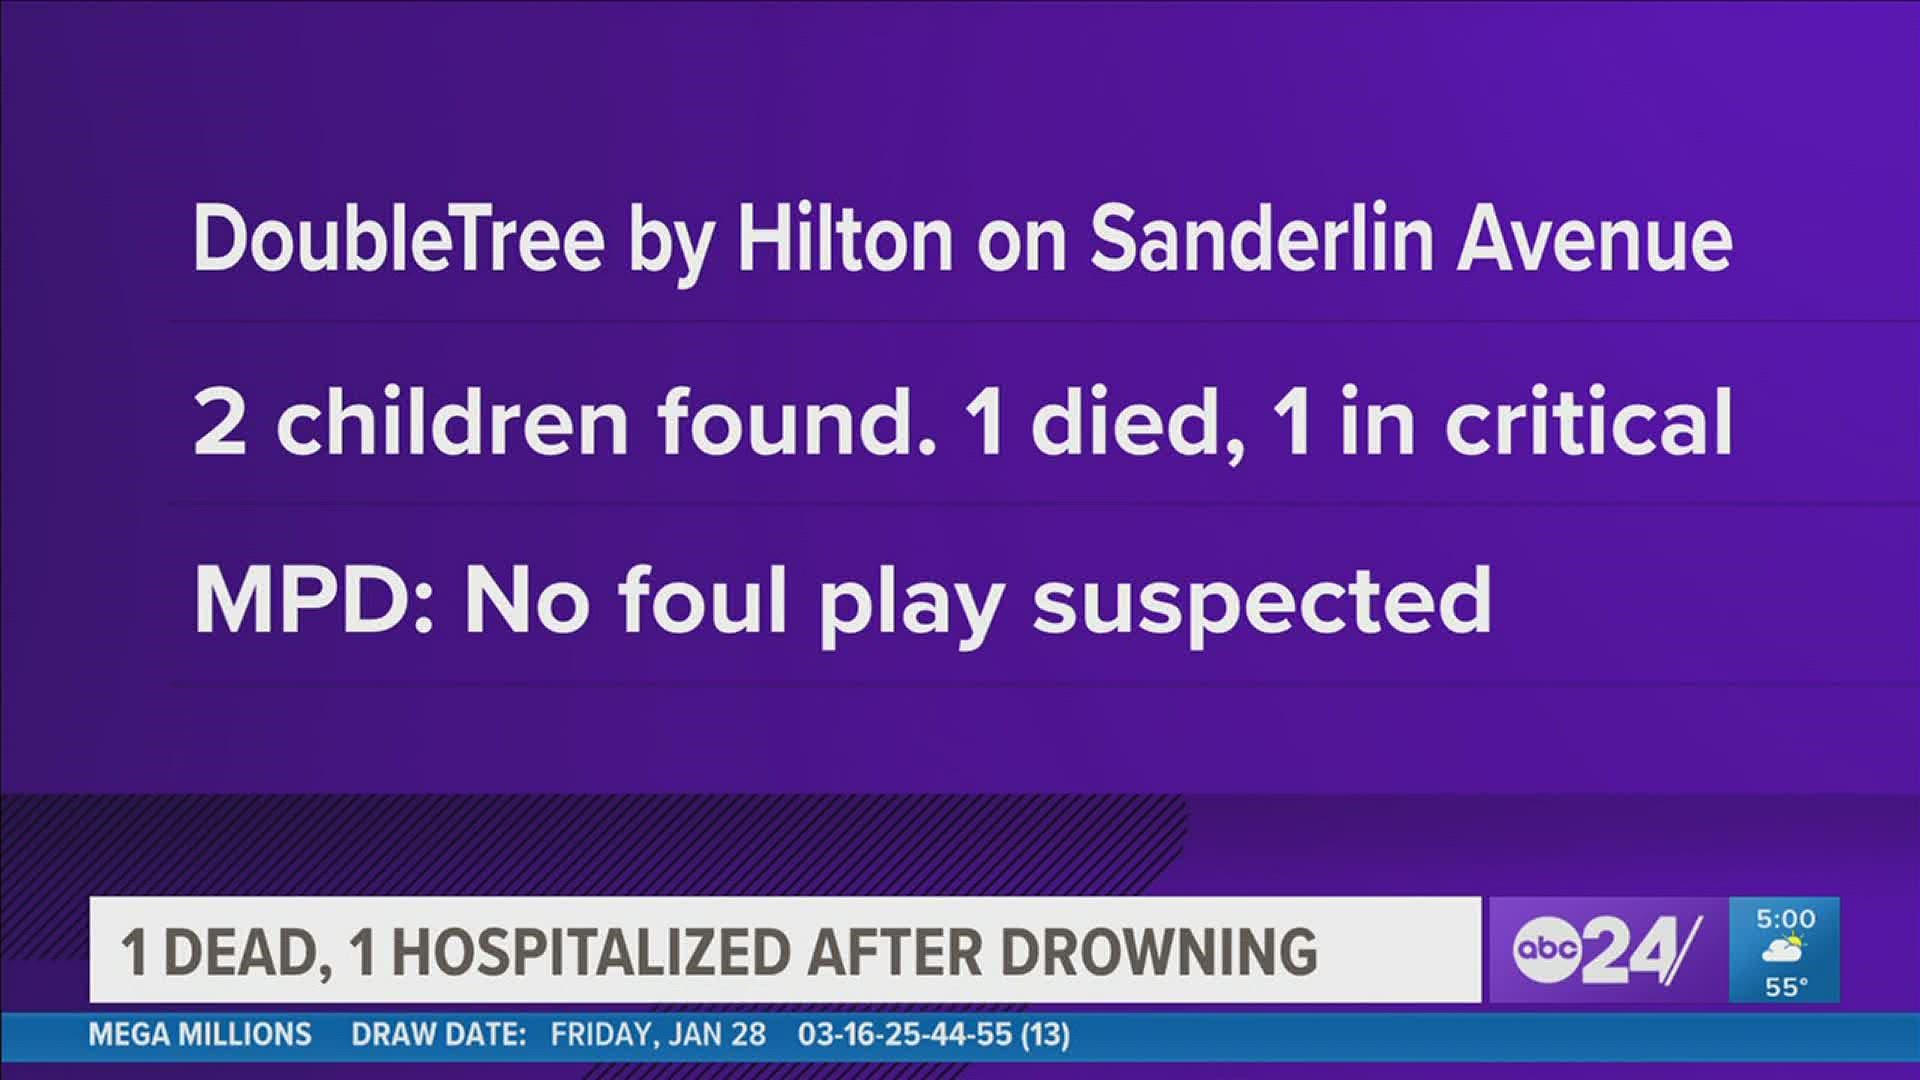 Two children were found drowning in the pool at the DoubleTree hotel on Sanderlin Avenue